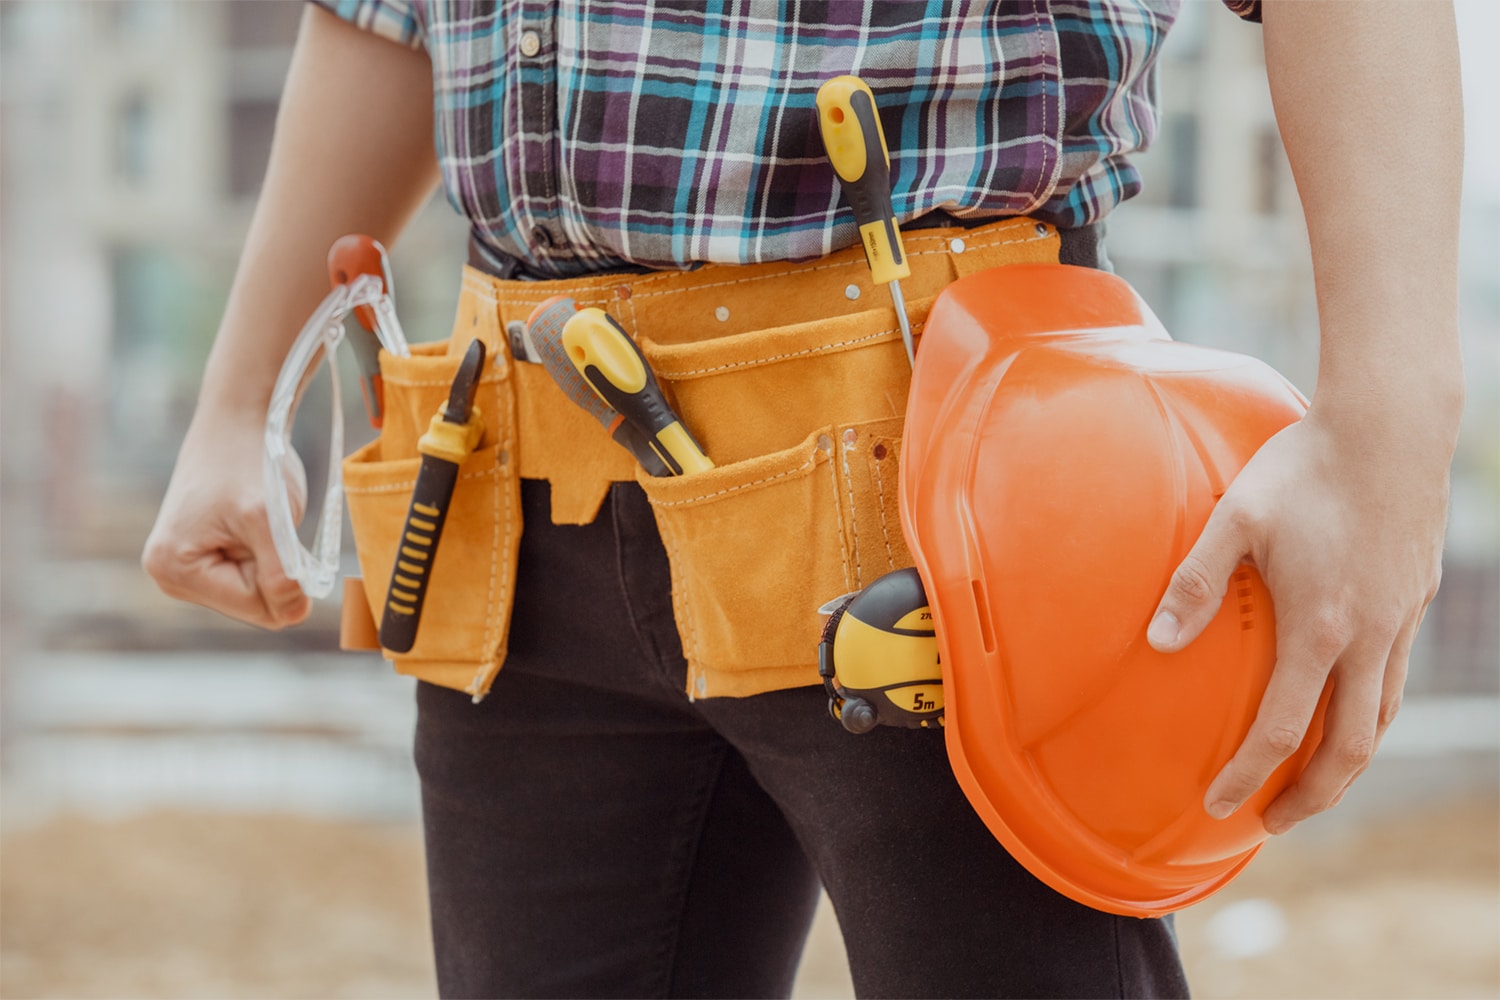 This is the cover photo for our Best Tool Belt article. It shows a construction worker wearing black pants and a plaid shirt wearing a tool belt with assorted tools inside. There is a blurred out background of the construction site.